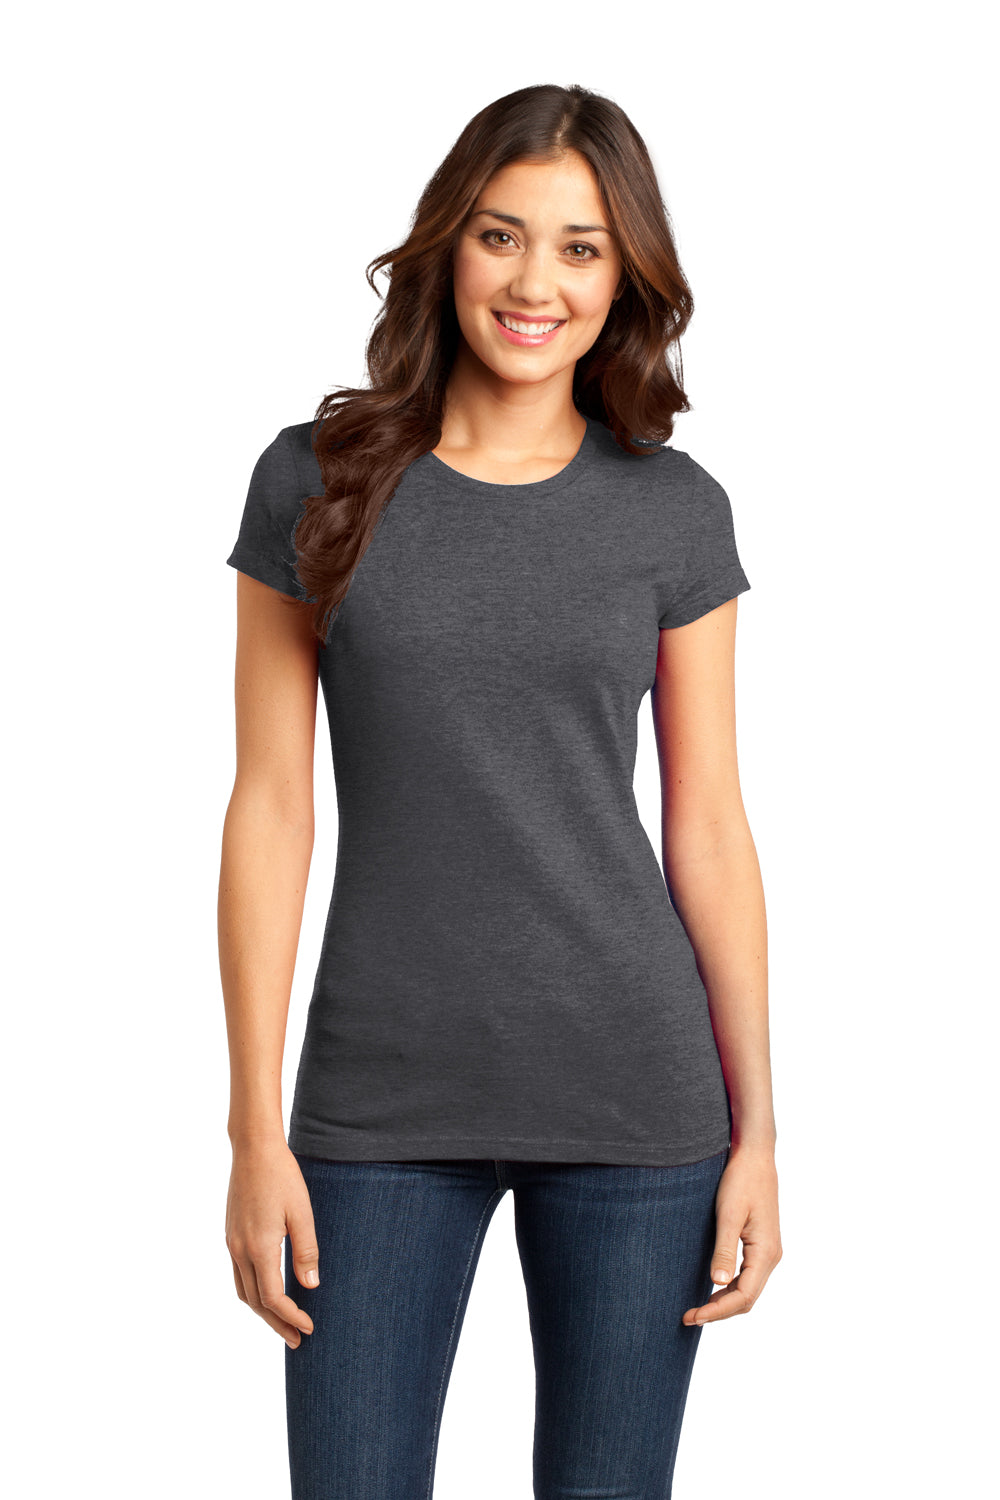 District DT6001 Womens Very Important Short Sleeve Crewneck T-Shirt Heather Charcoal Grey Front